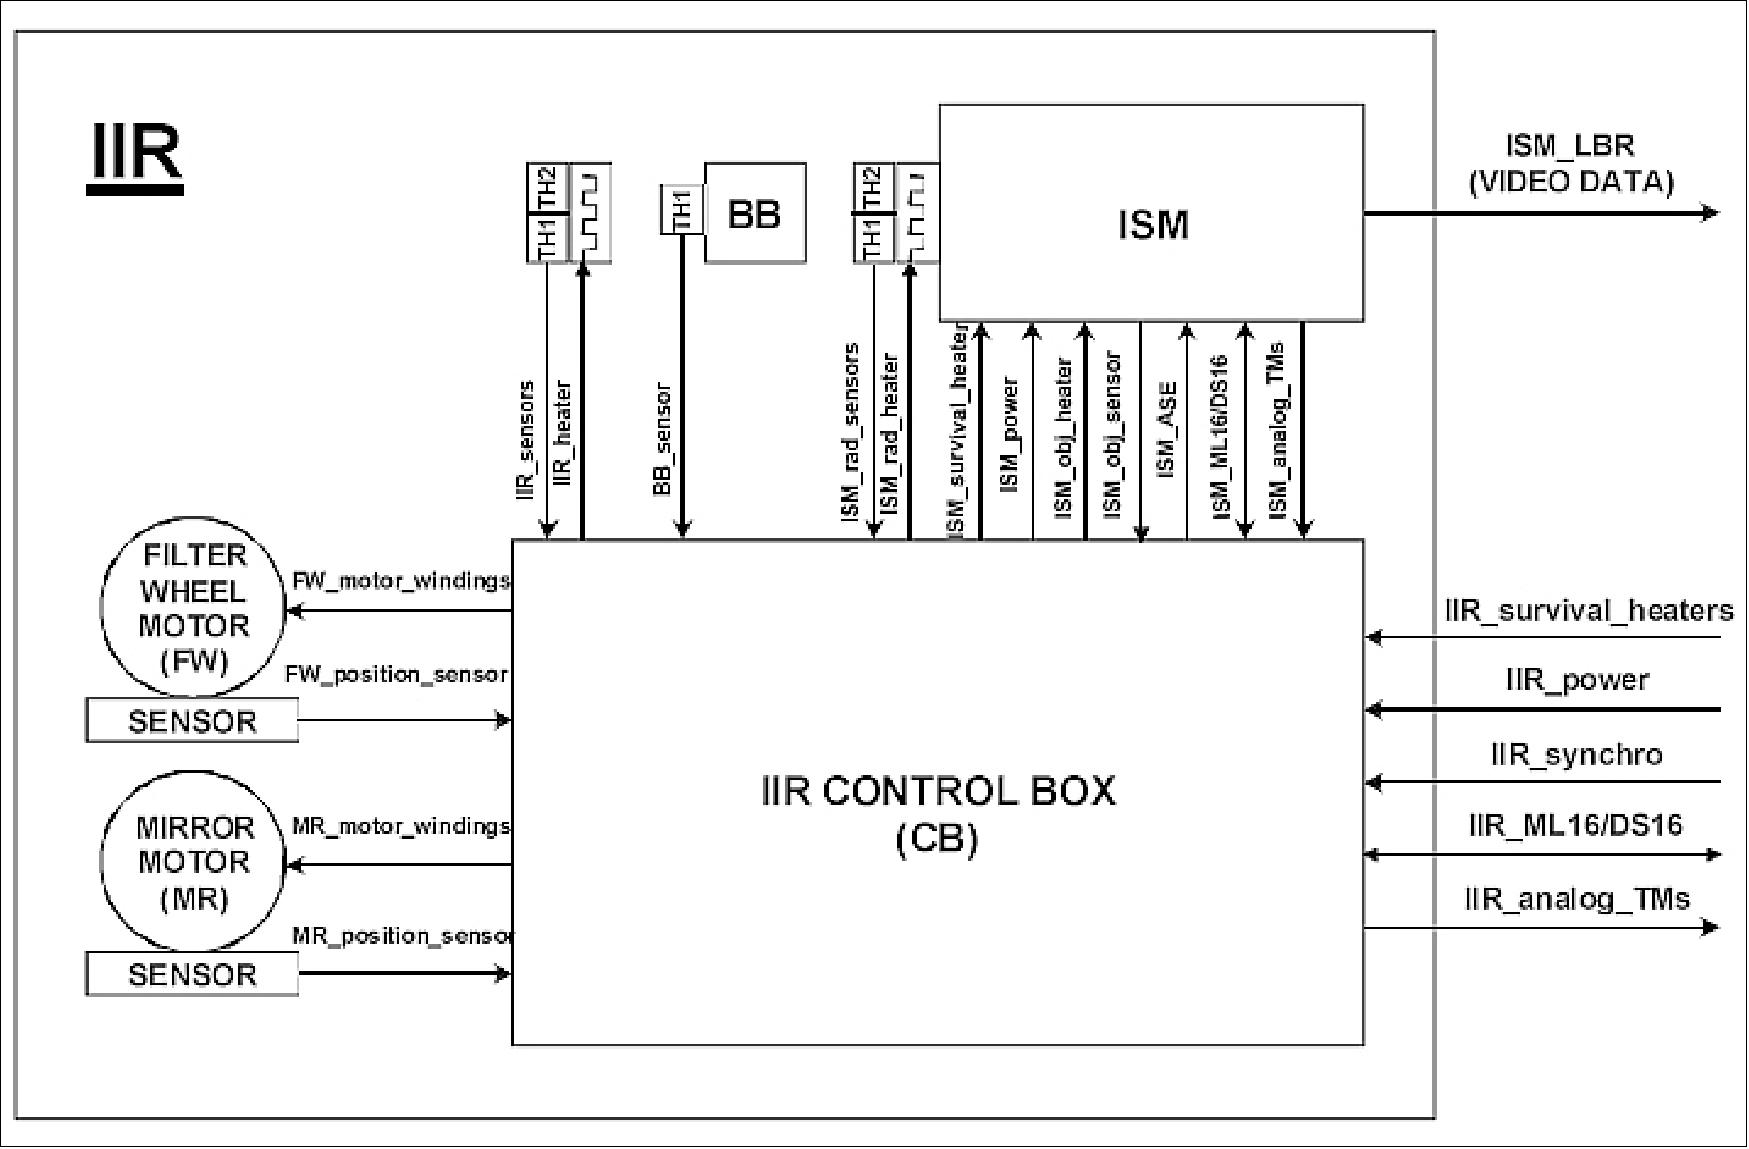 Figure 31: Electronic architecture of the IIR instrument (image credit: CNES)